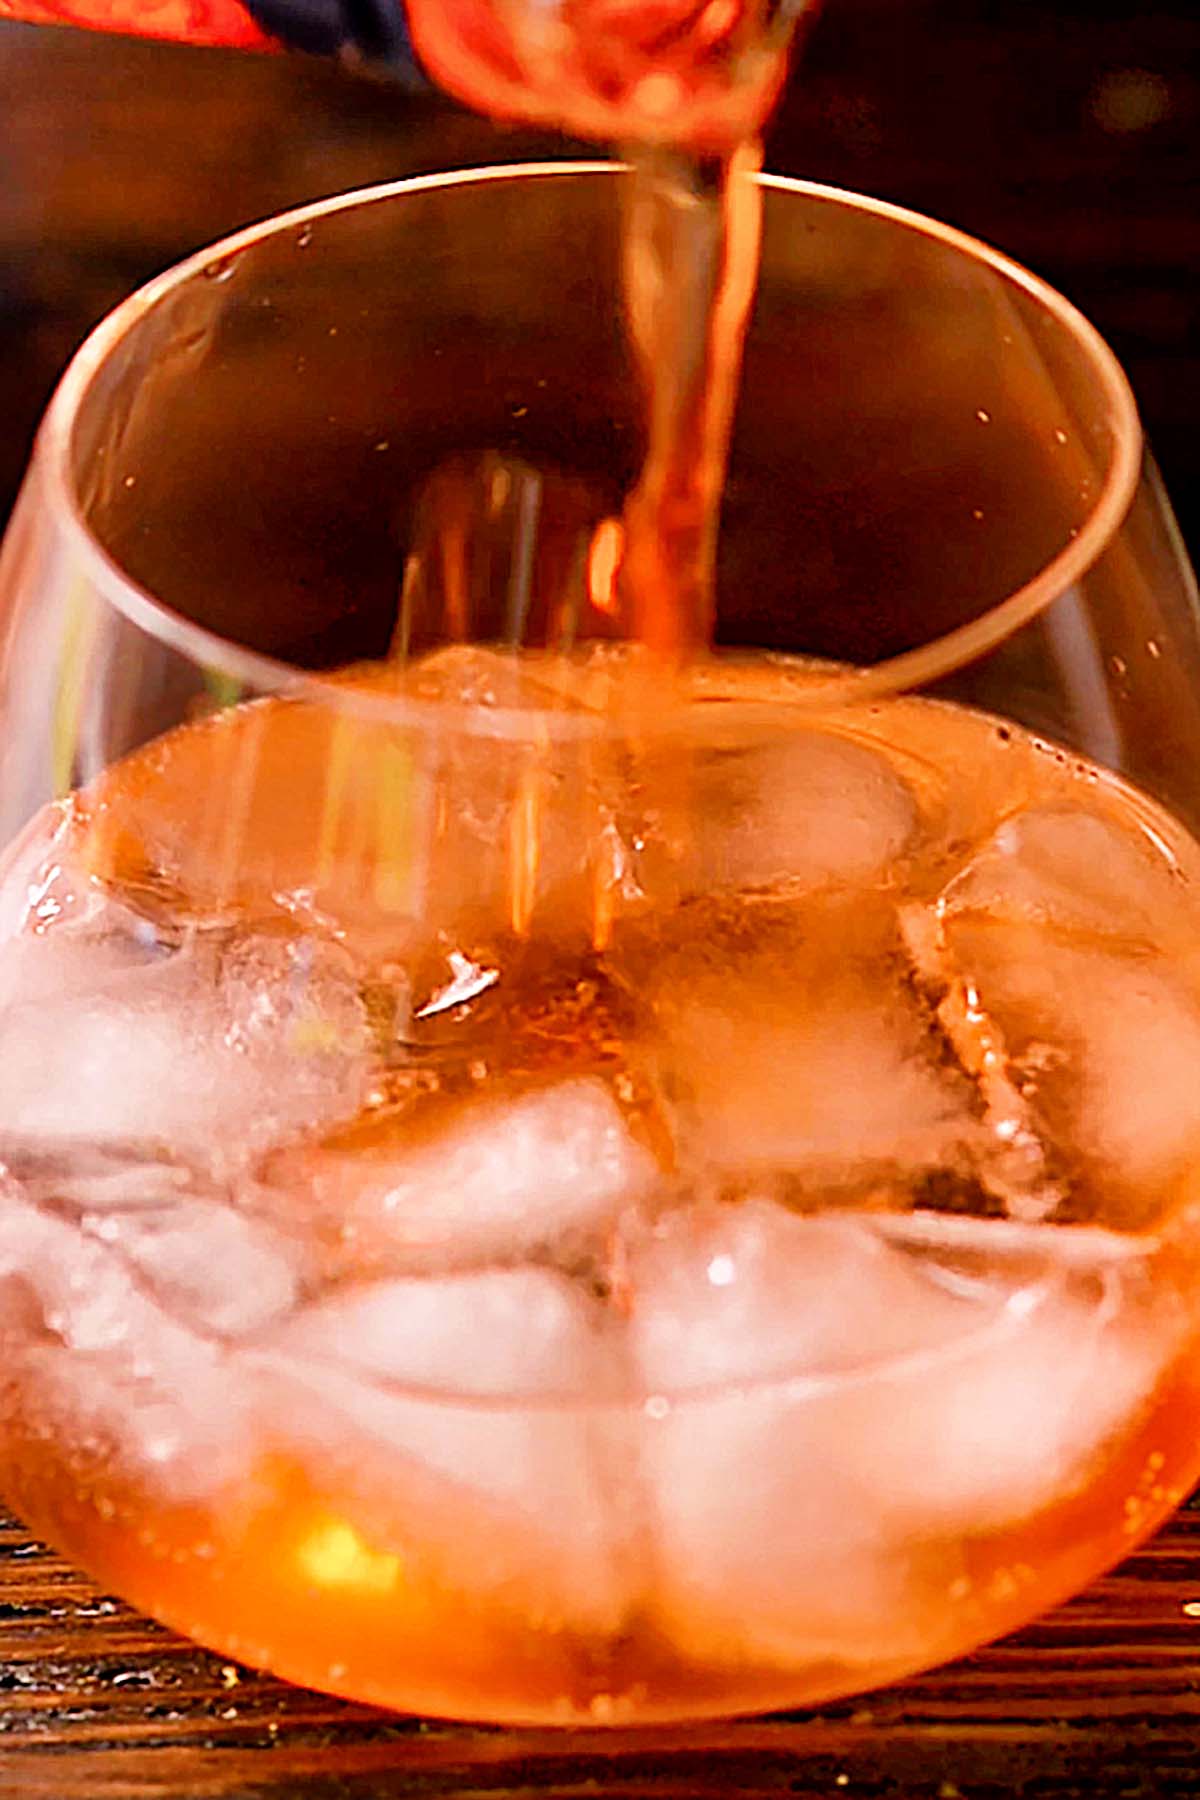 Aperol being poured into a wine glass of ice and Prosecco.